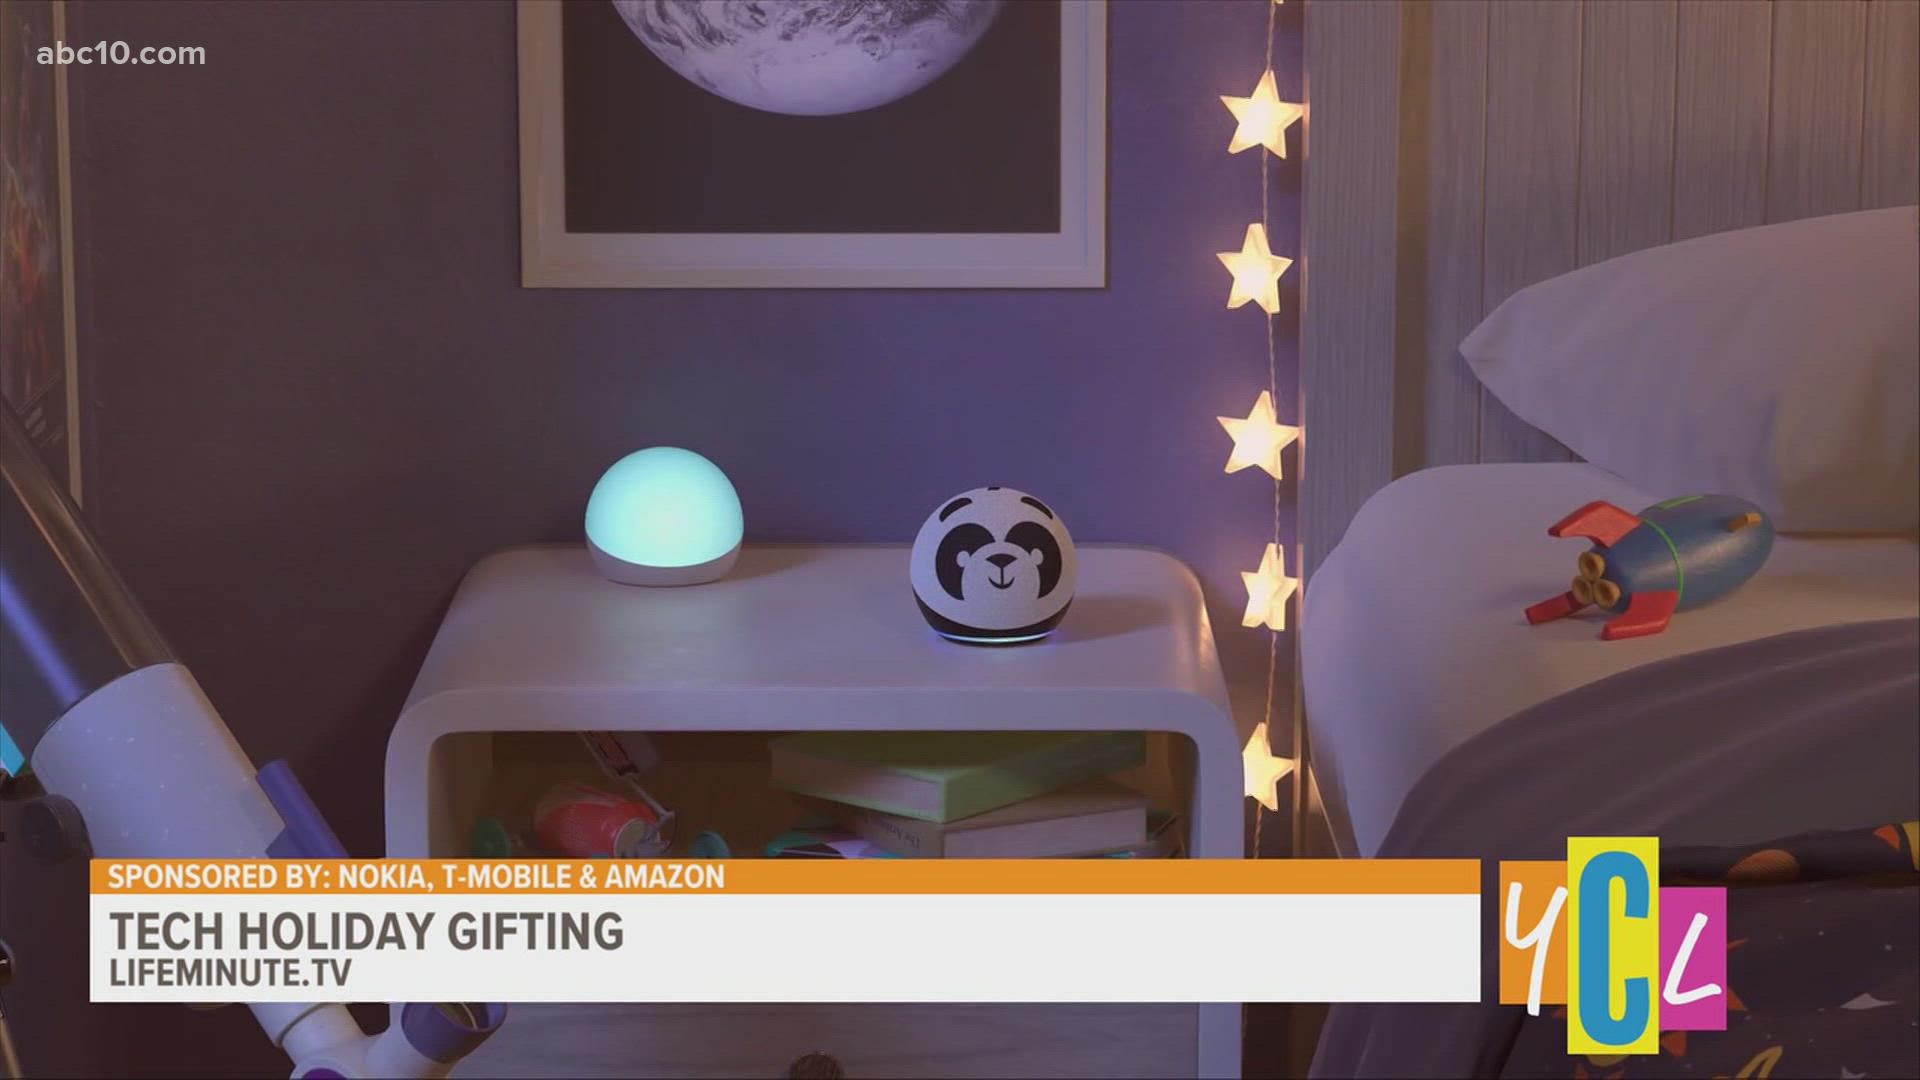 Tis the season to shop! See how you can treat your loved ones with tech gifts that they’ll enjoy. 
This segment paid for by Nokia, T-Mobile, and Amazon.